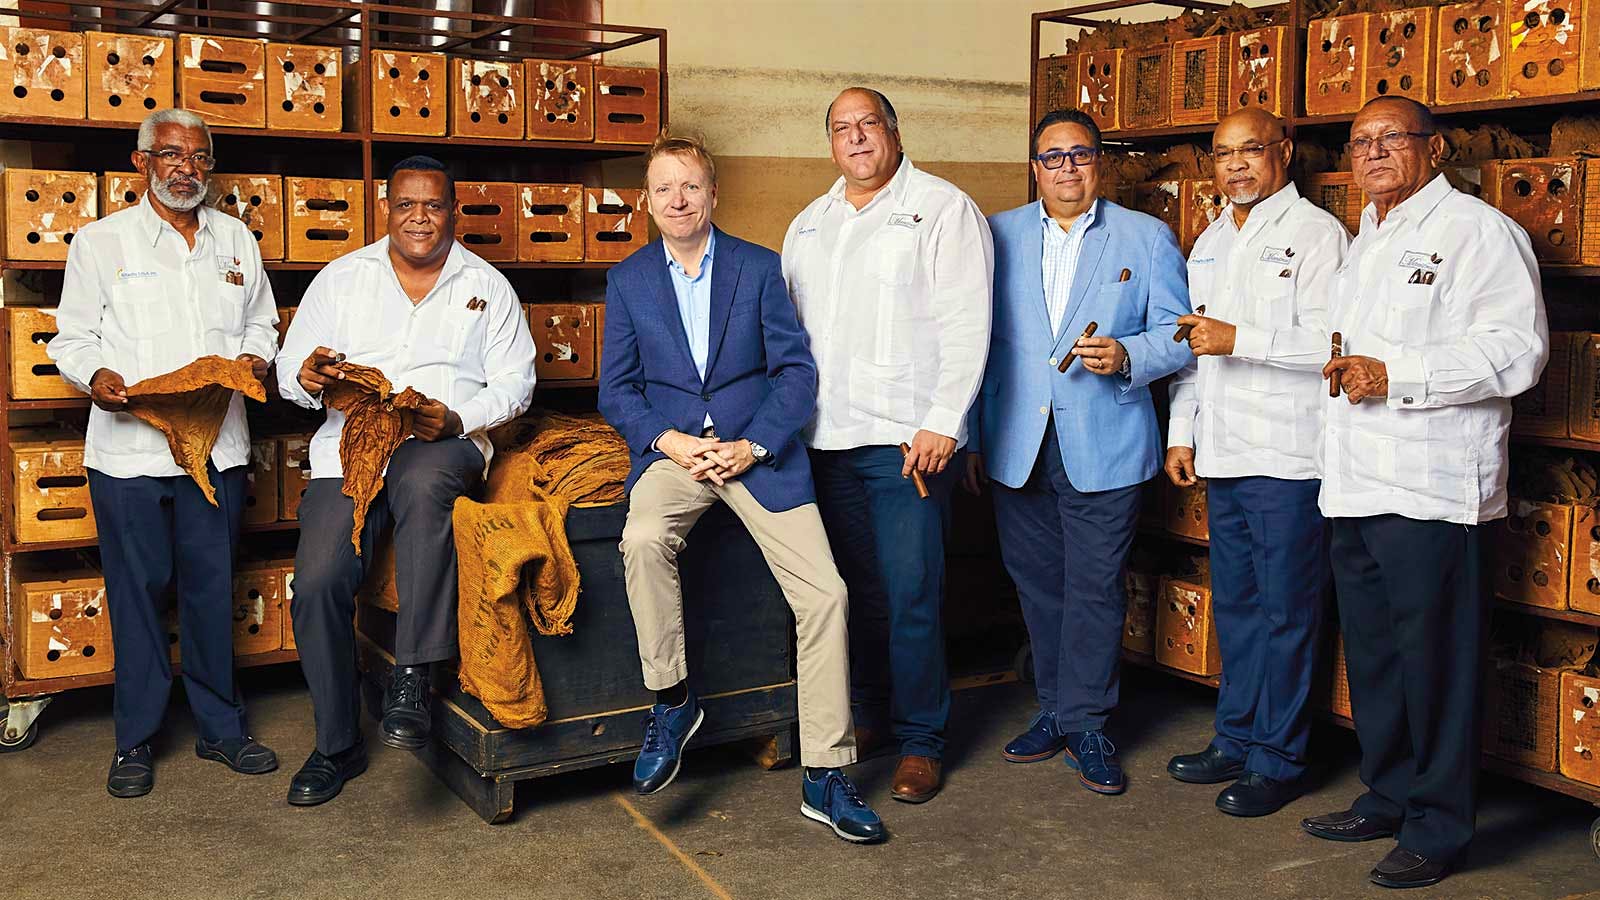 These stewards of Tabacalera de Garcia ensure quality and consistency for the brands of Altadis. They stand in front of blend boxes on the factory floor. From left to right: Nestor Rodriguez, Pedro Ventura, Javier Estades, Javier Elmudesi, Rafael Nodal, Carlos Travieso and Victor Avila.